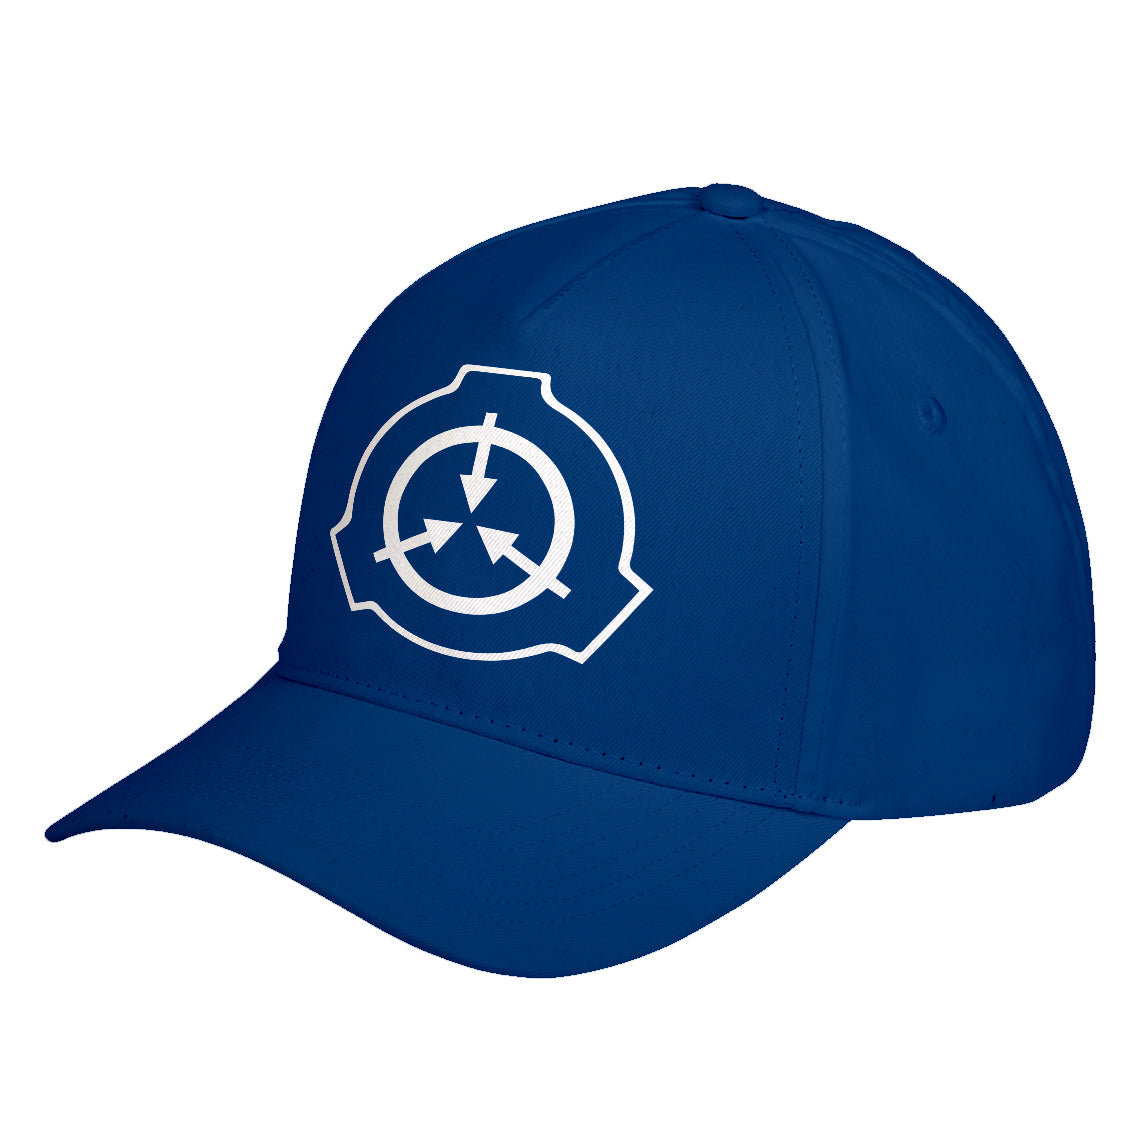 Hat SCP Secure Contain Protect Baseball Cap – Indica Plateau